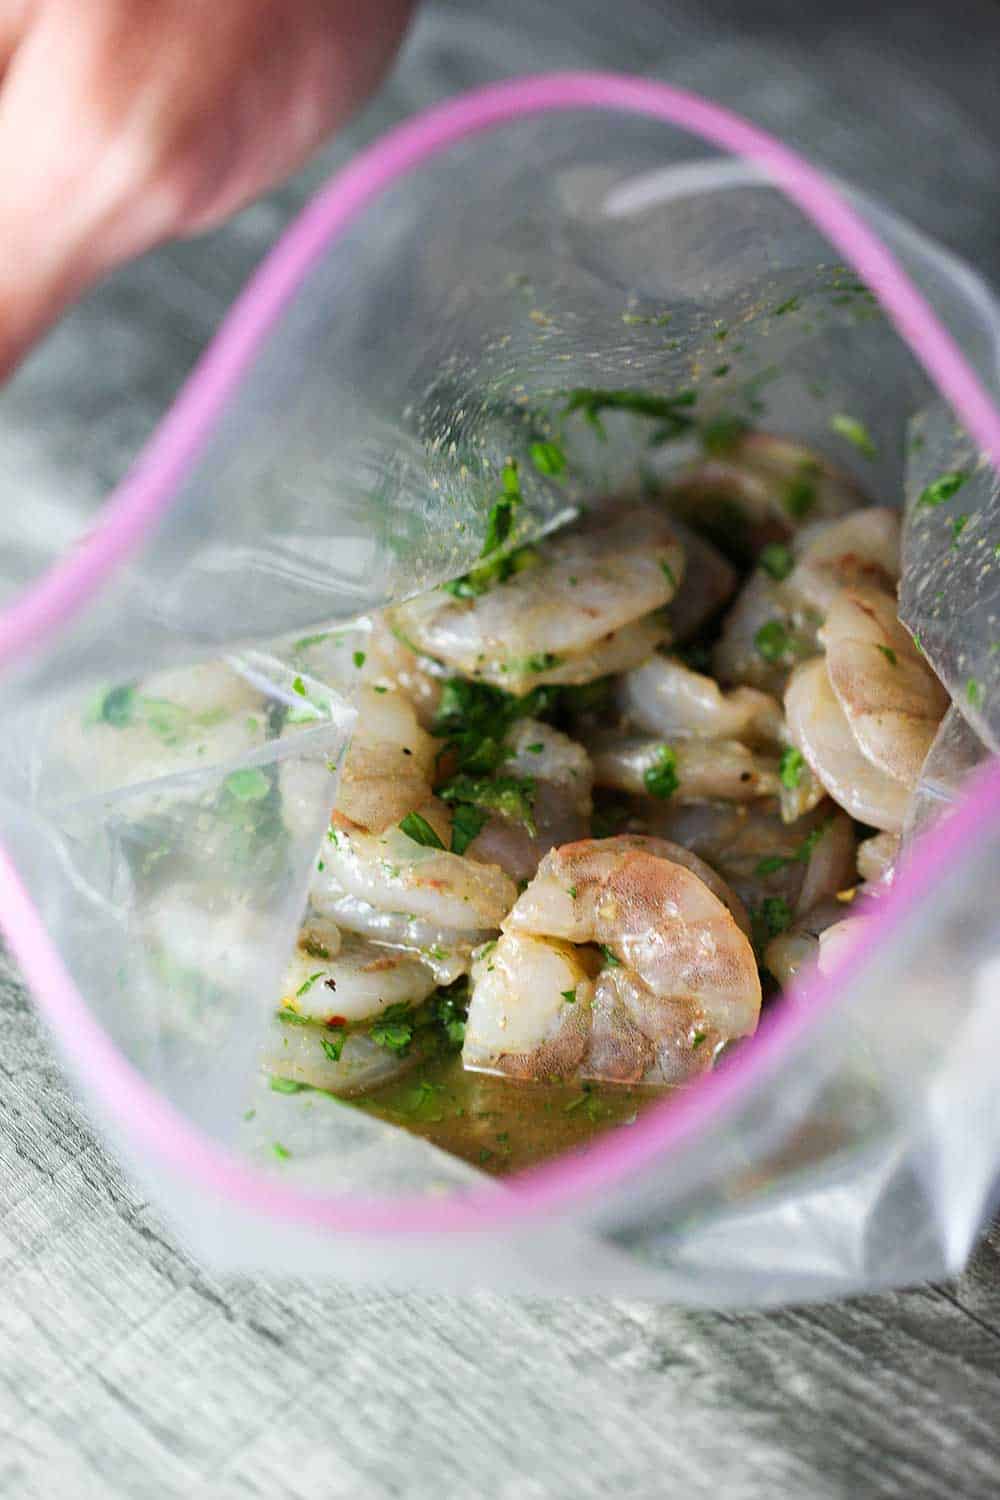 Place the cleaned shrimp into a large ziplock baggie and pour in some of the marinade. 